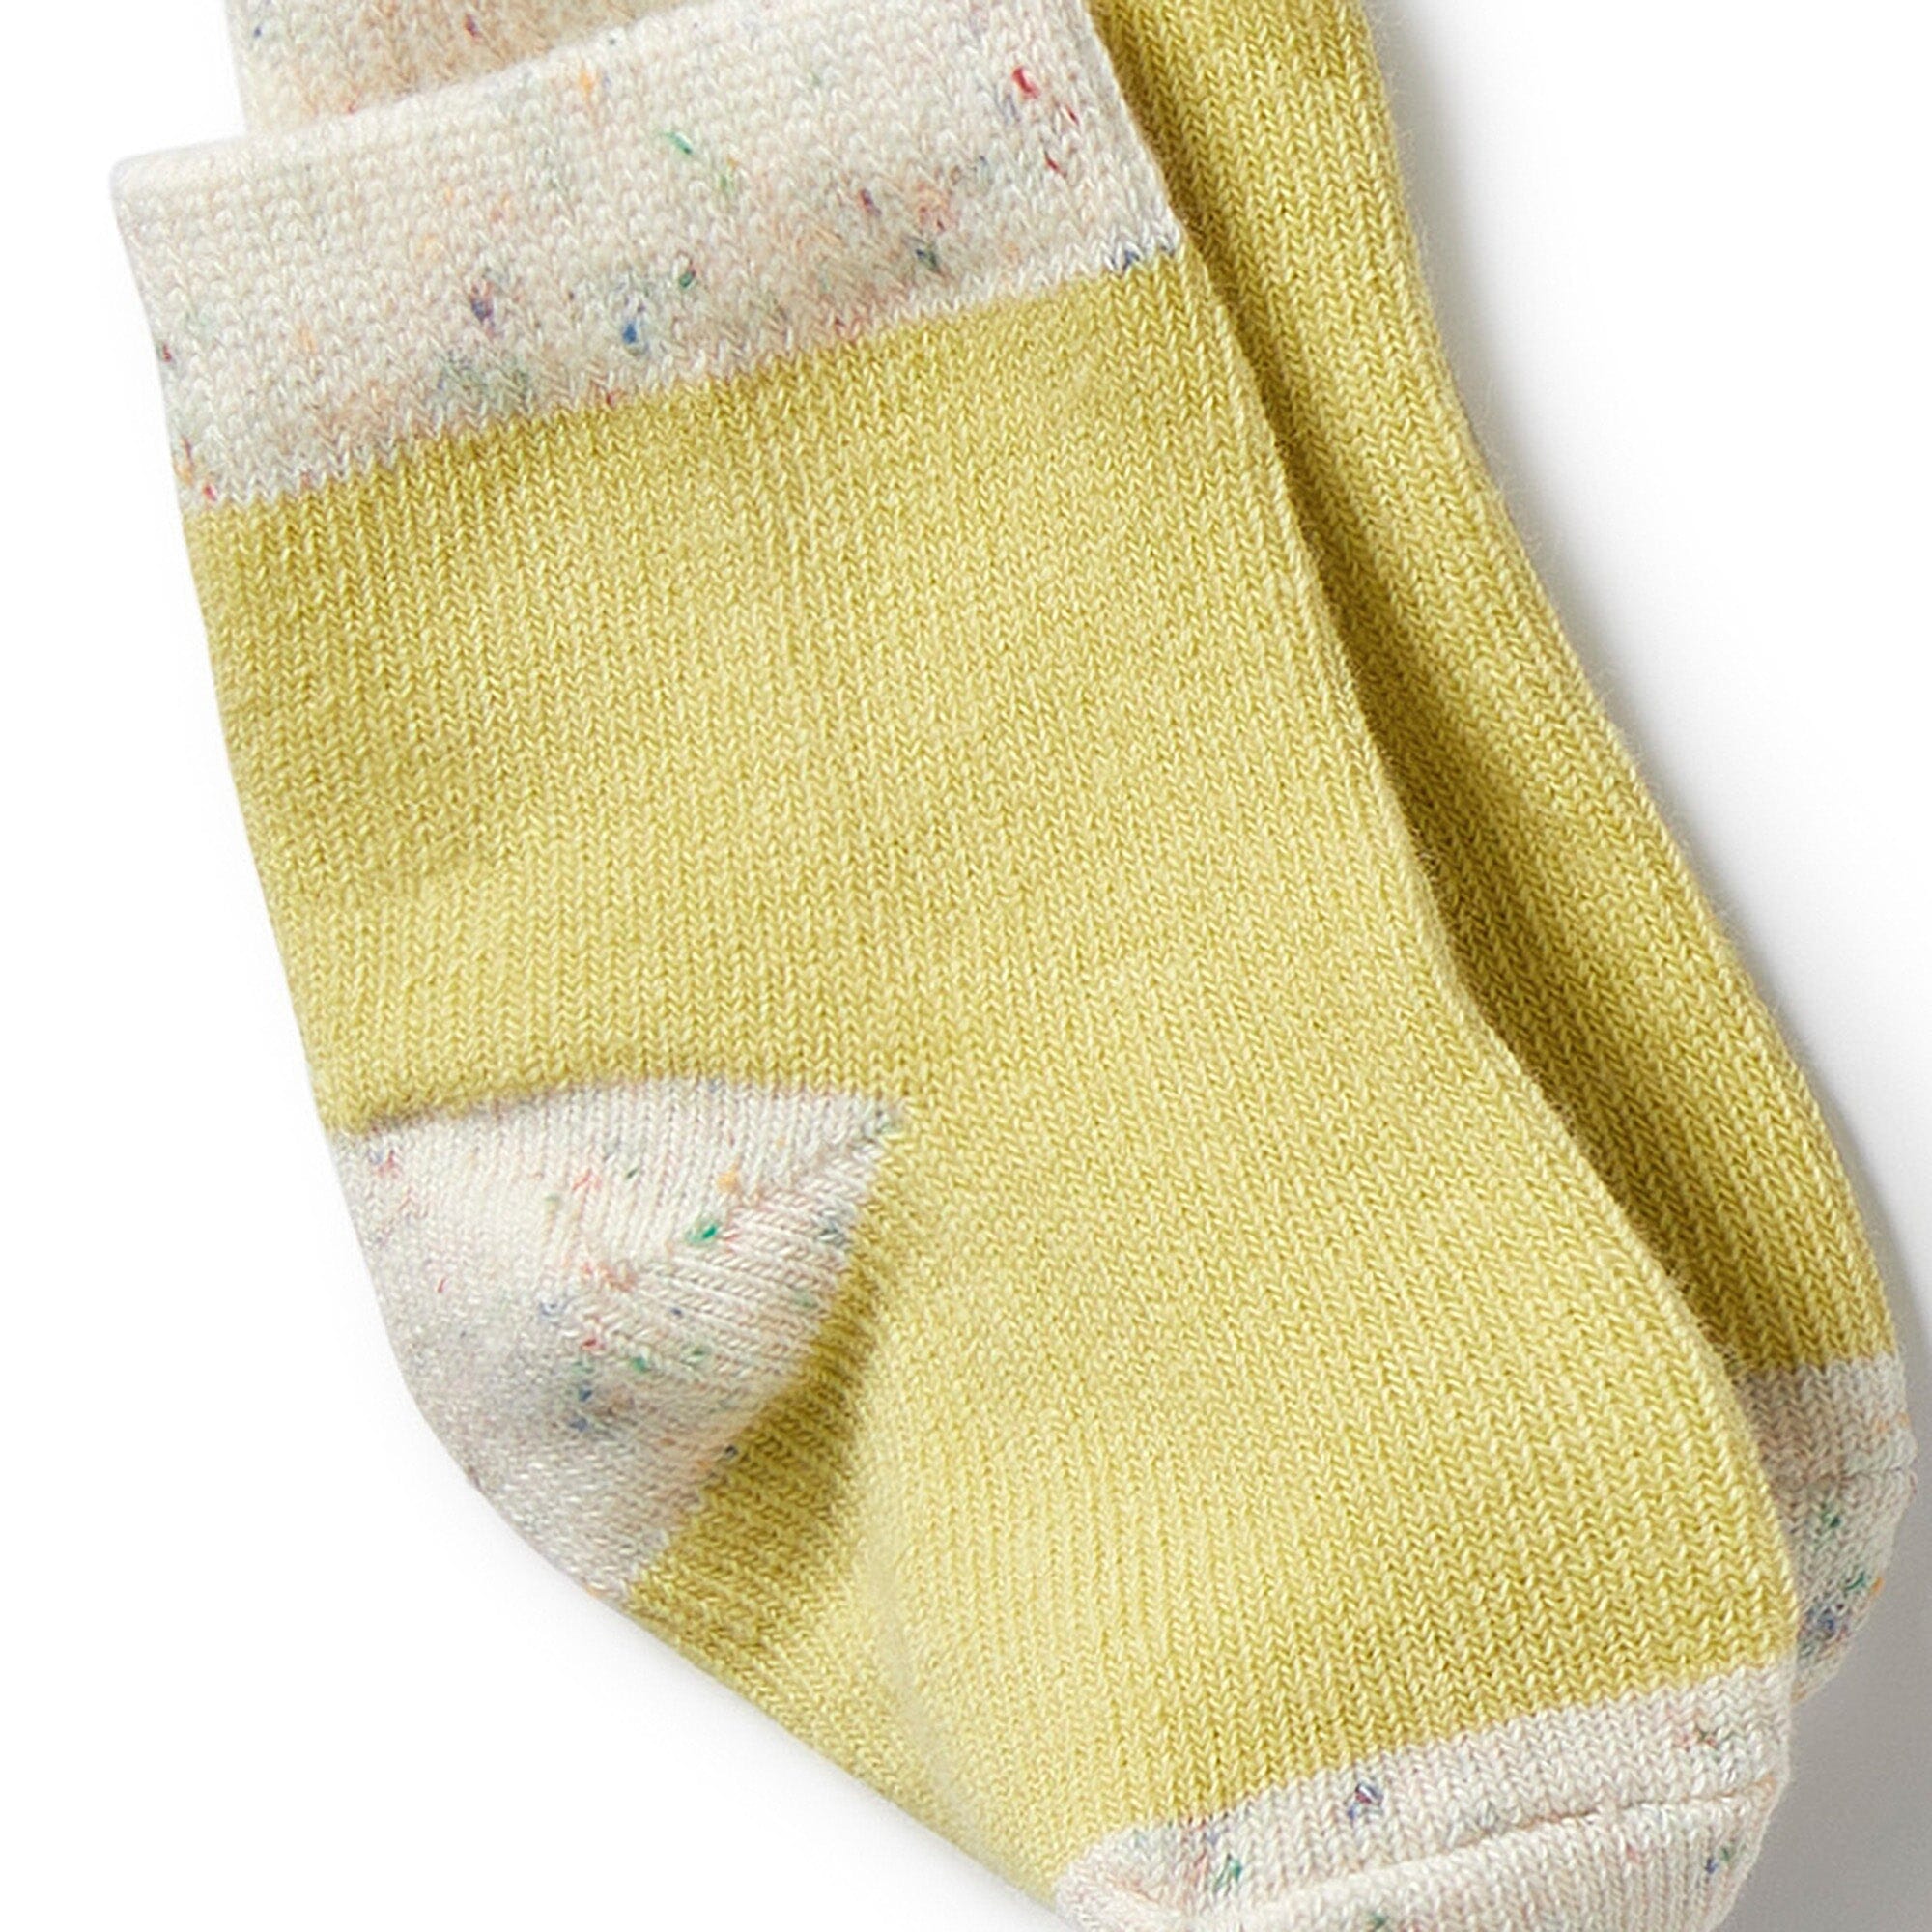 Wilson & Frenchy - Organic 3 Pack Baby Socks - Endive, Bluebell, Blue Baby Wilson & Frenchy